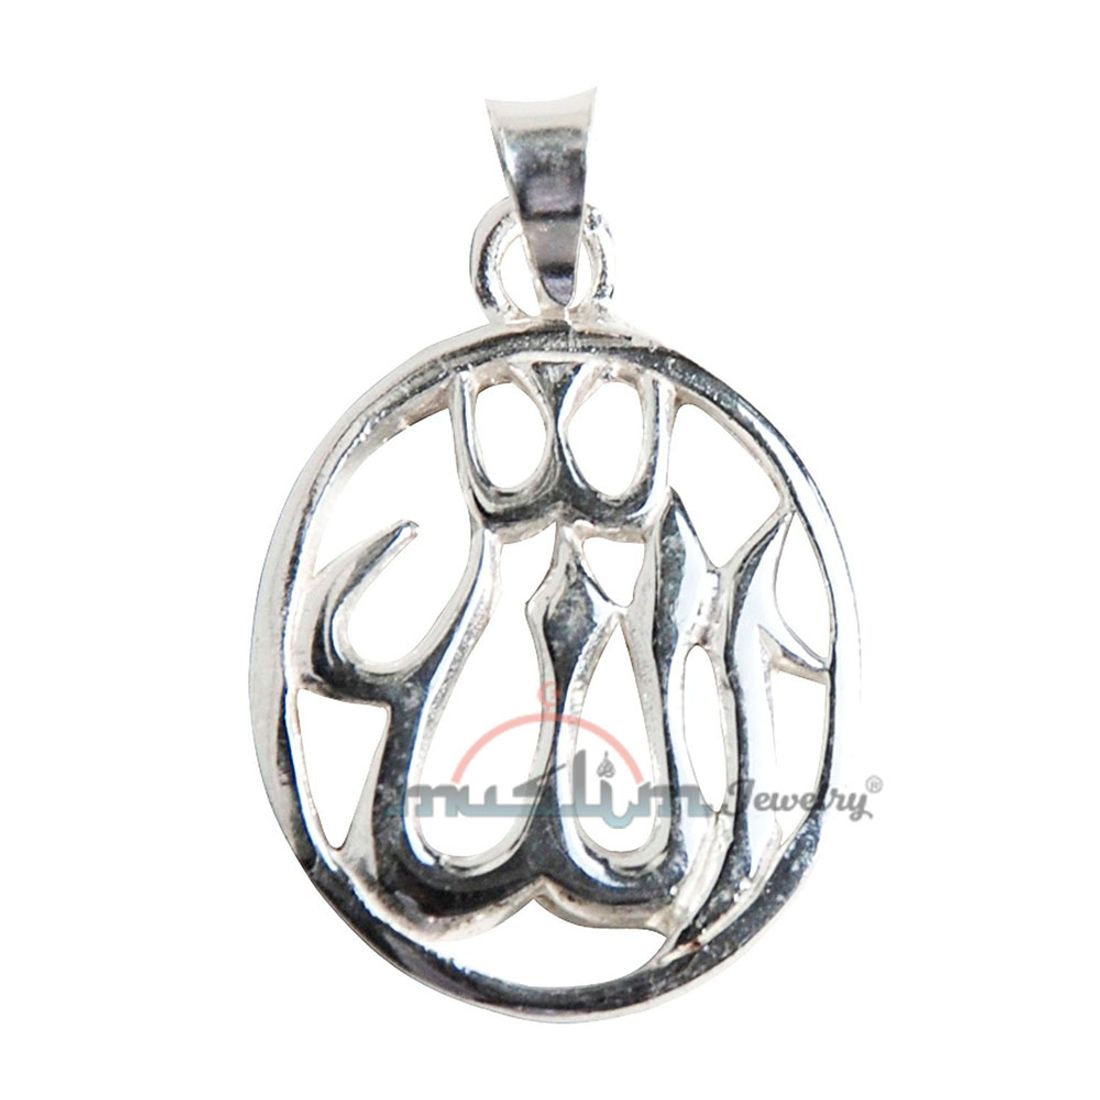 Unique Small Sterling Silver Oval Cut-out Allah Pendant for Necklaces Islamic Jewelry